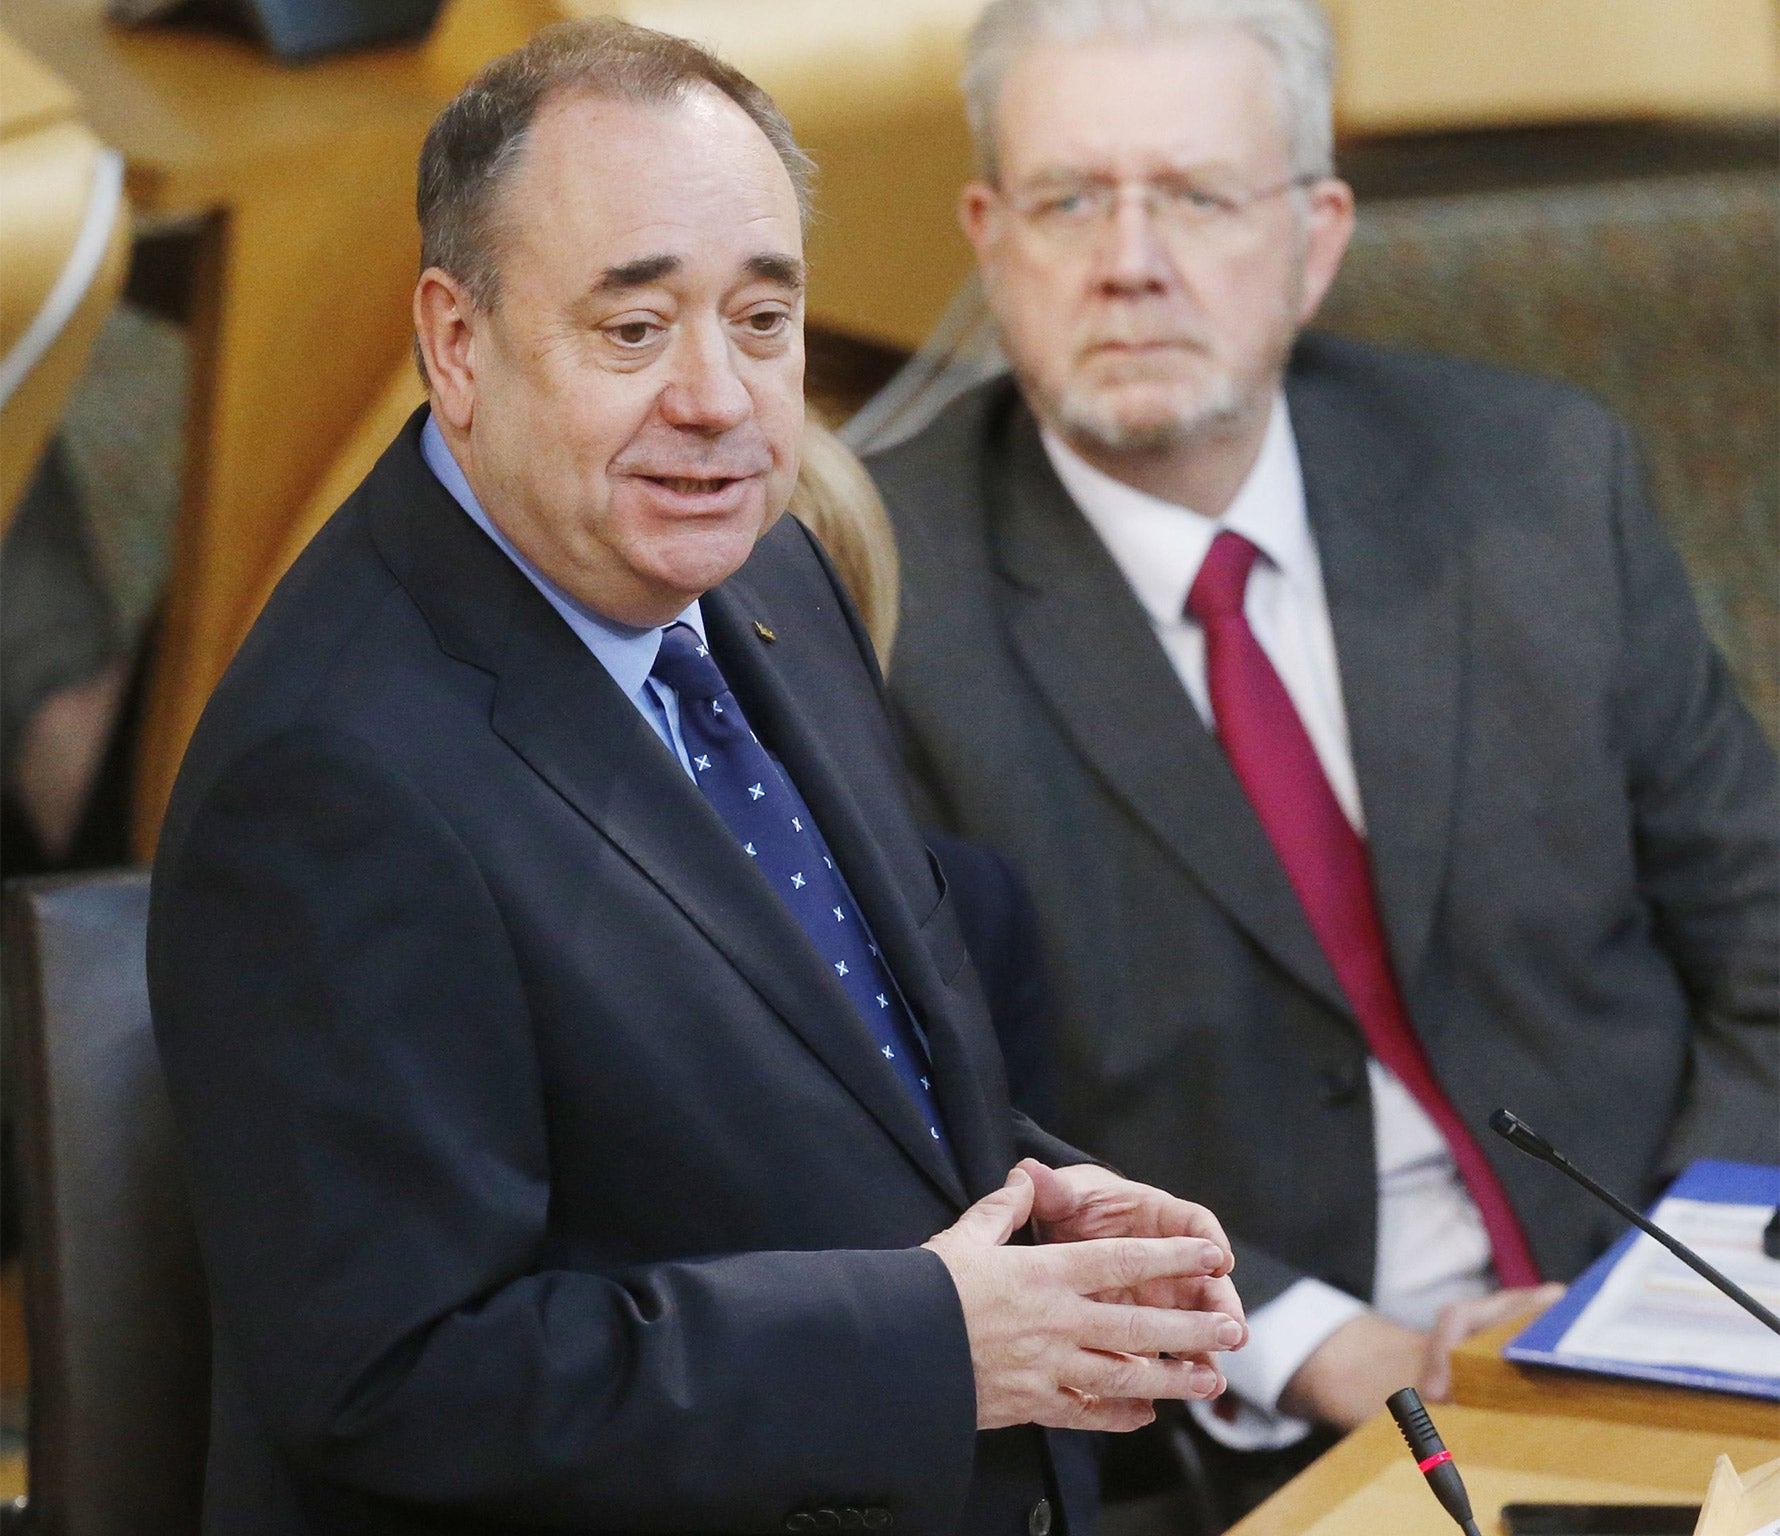 Alex Salmond resigns as First Minister of Scotland during a statement to the Scottish Parliament in Edinburgh